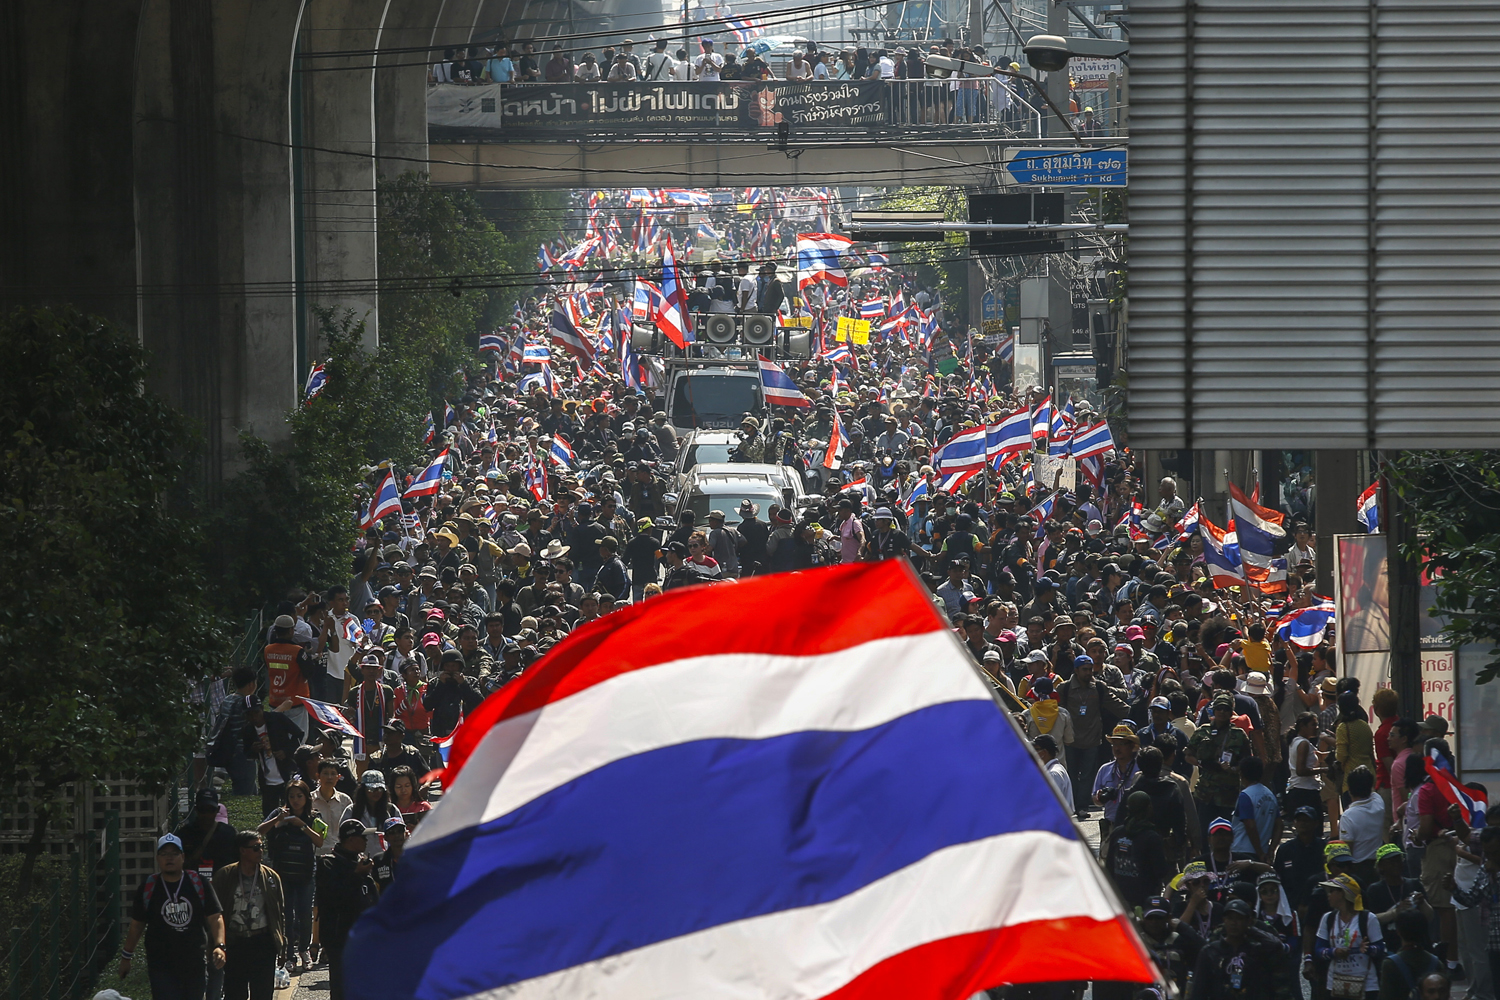 Anti-government protesters take part in a rally in central Bangkok Jan. 30, 2014 (Athit Perawongmetha / Reuters)